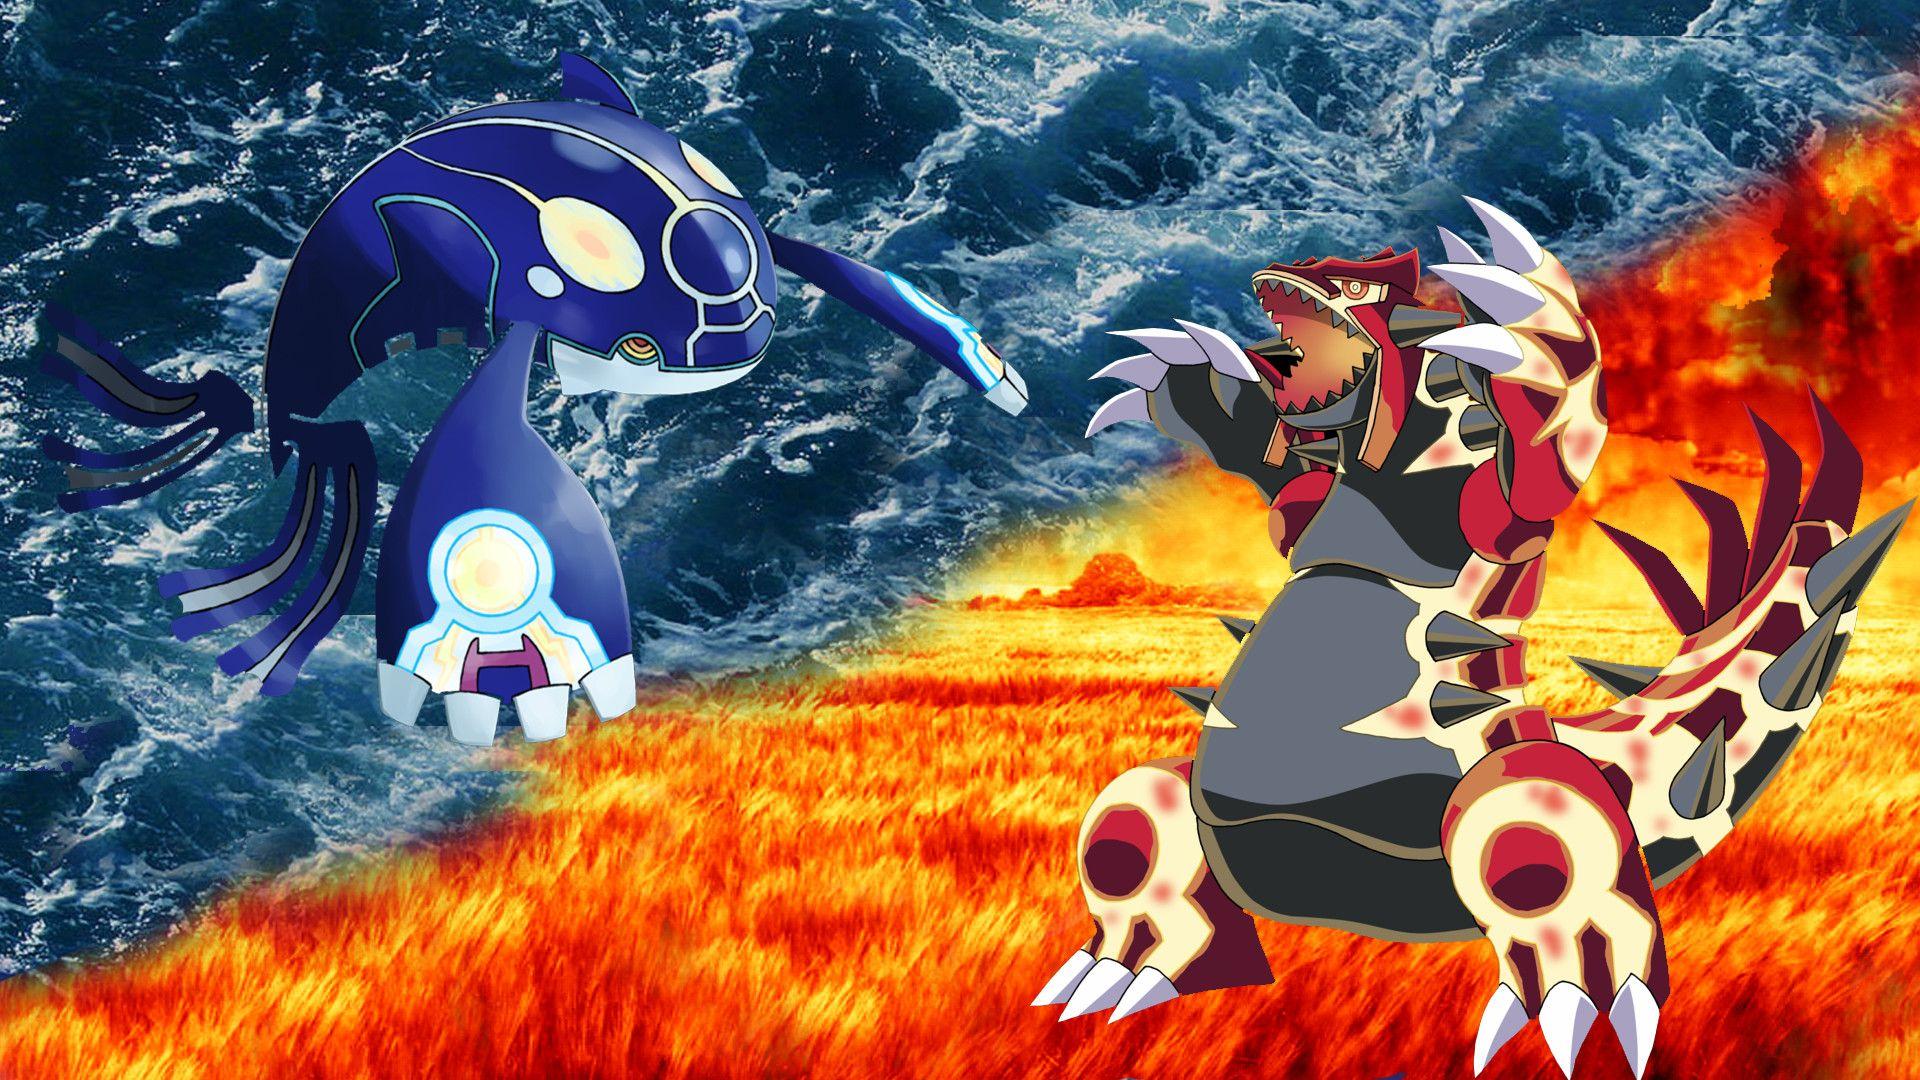 Primal Groudon and Kyogre Wallpapers